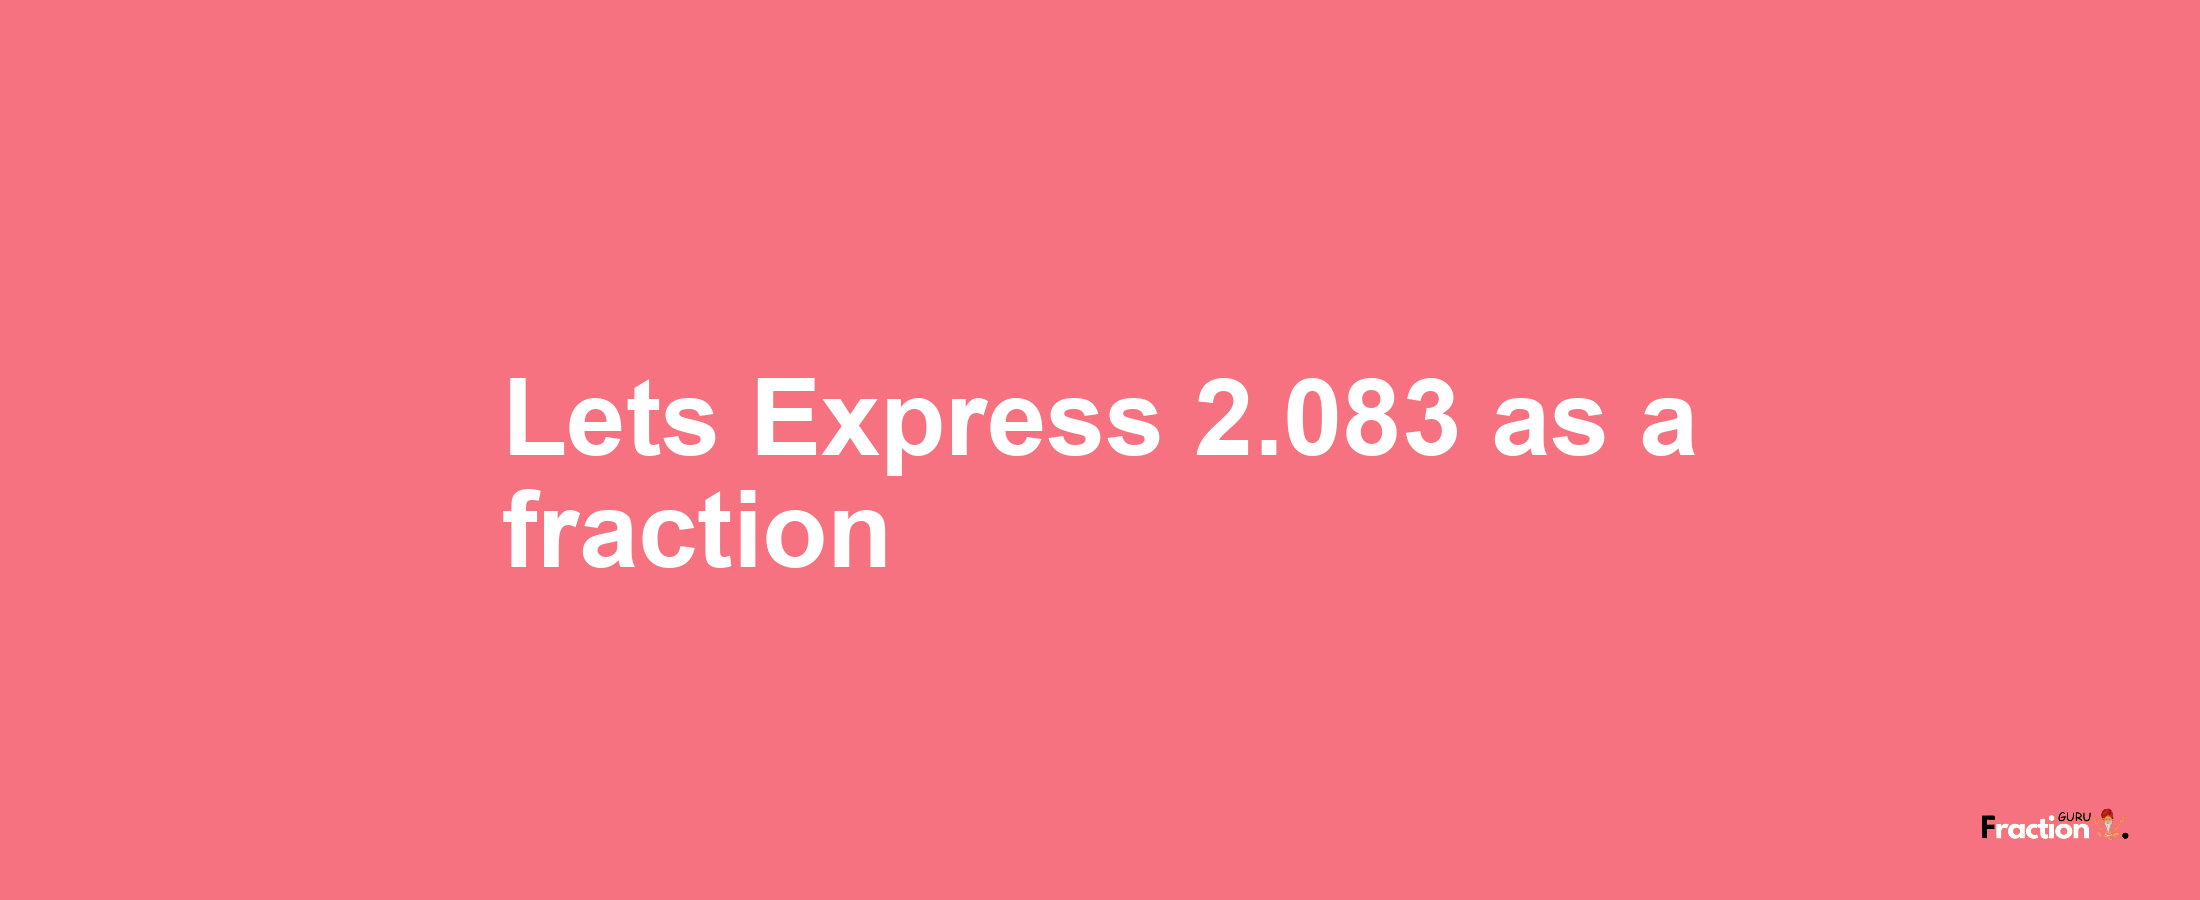 Lets Express 2.083 as afraction